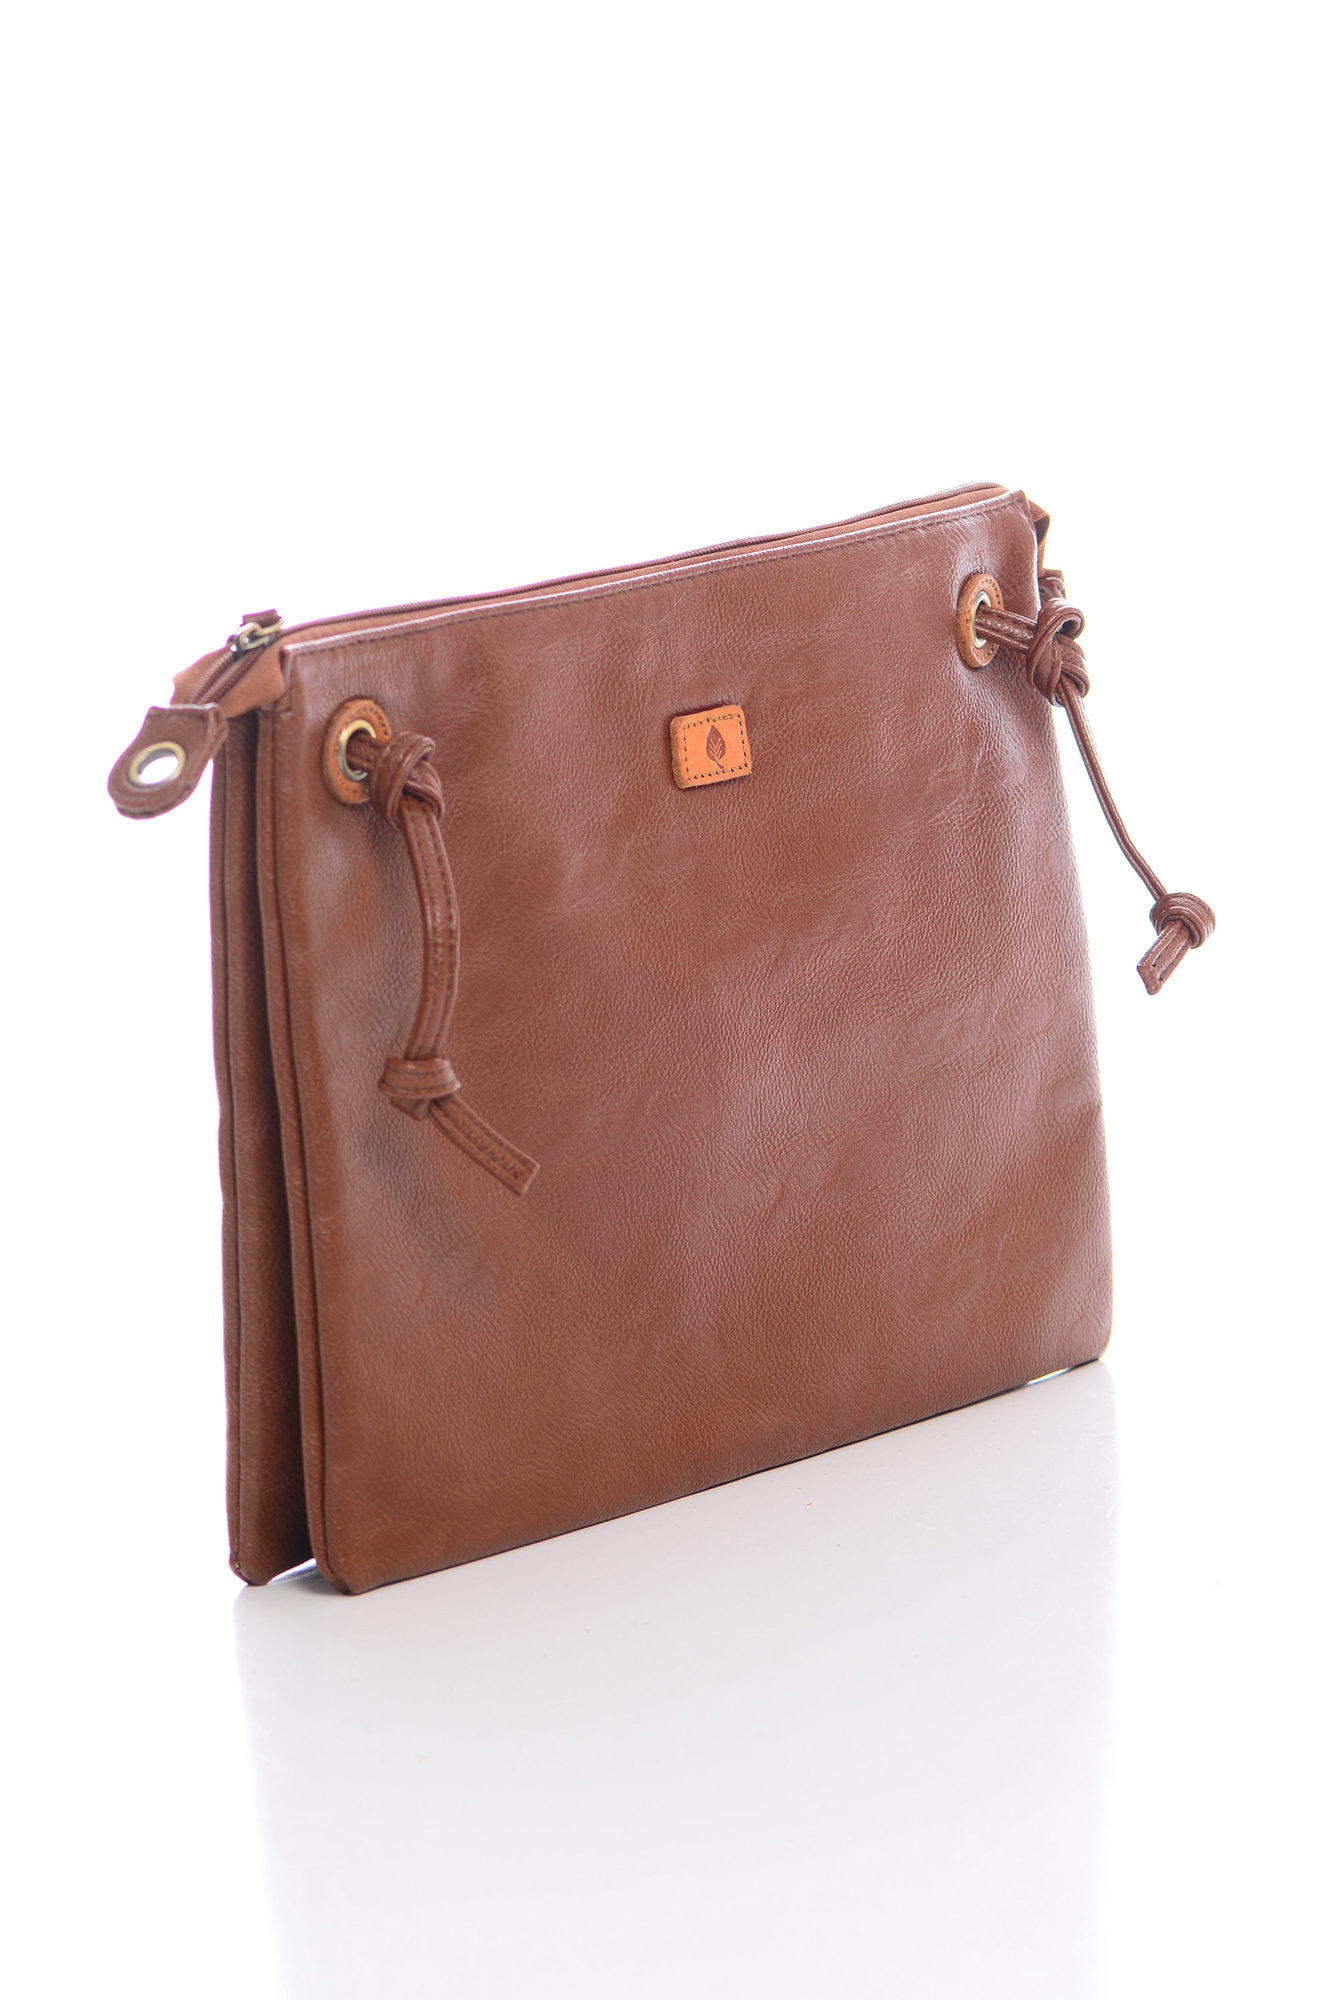 By My Side Purse, Brown - The Mint Julep Boutique